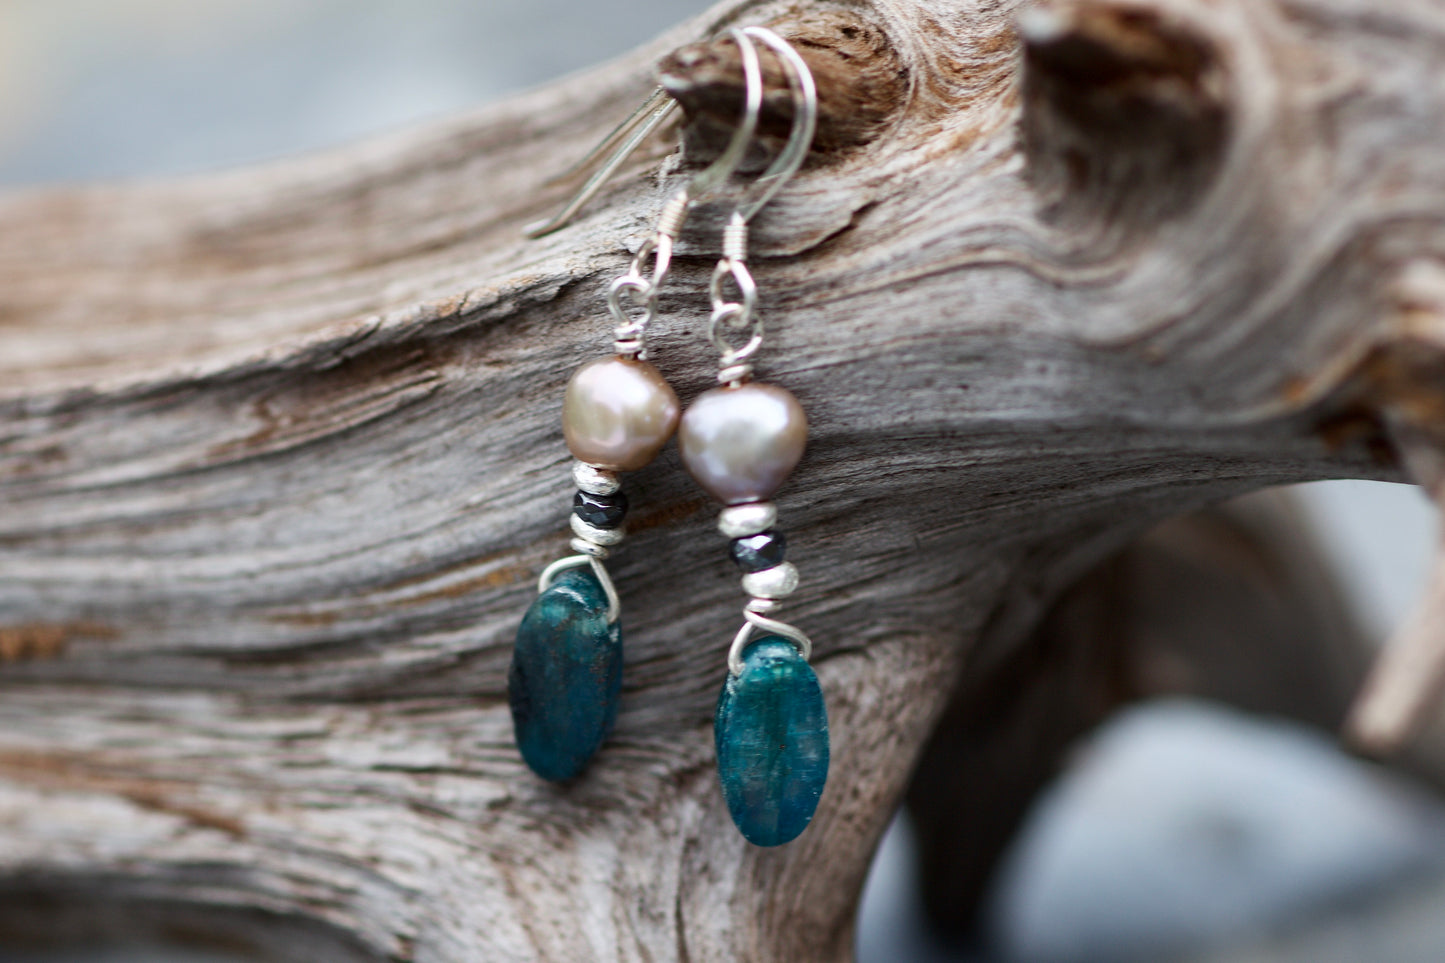 Lavender Freshwater Pearl, Hematite, Blue Apatite, and Sterling Silver Earrings